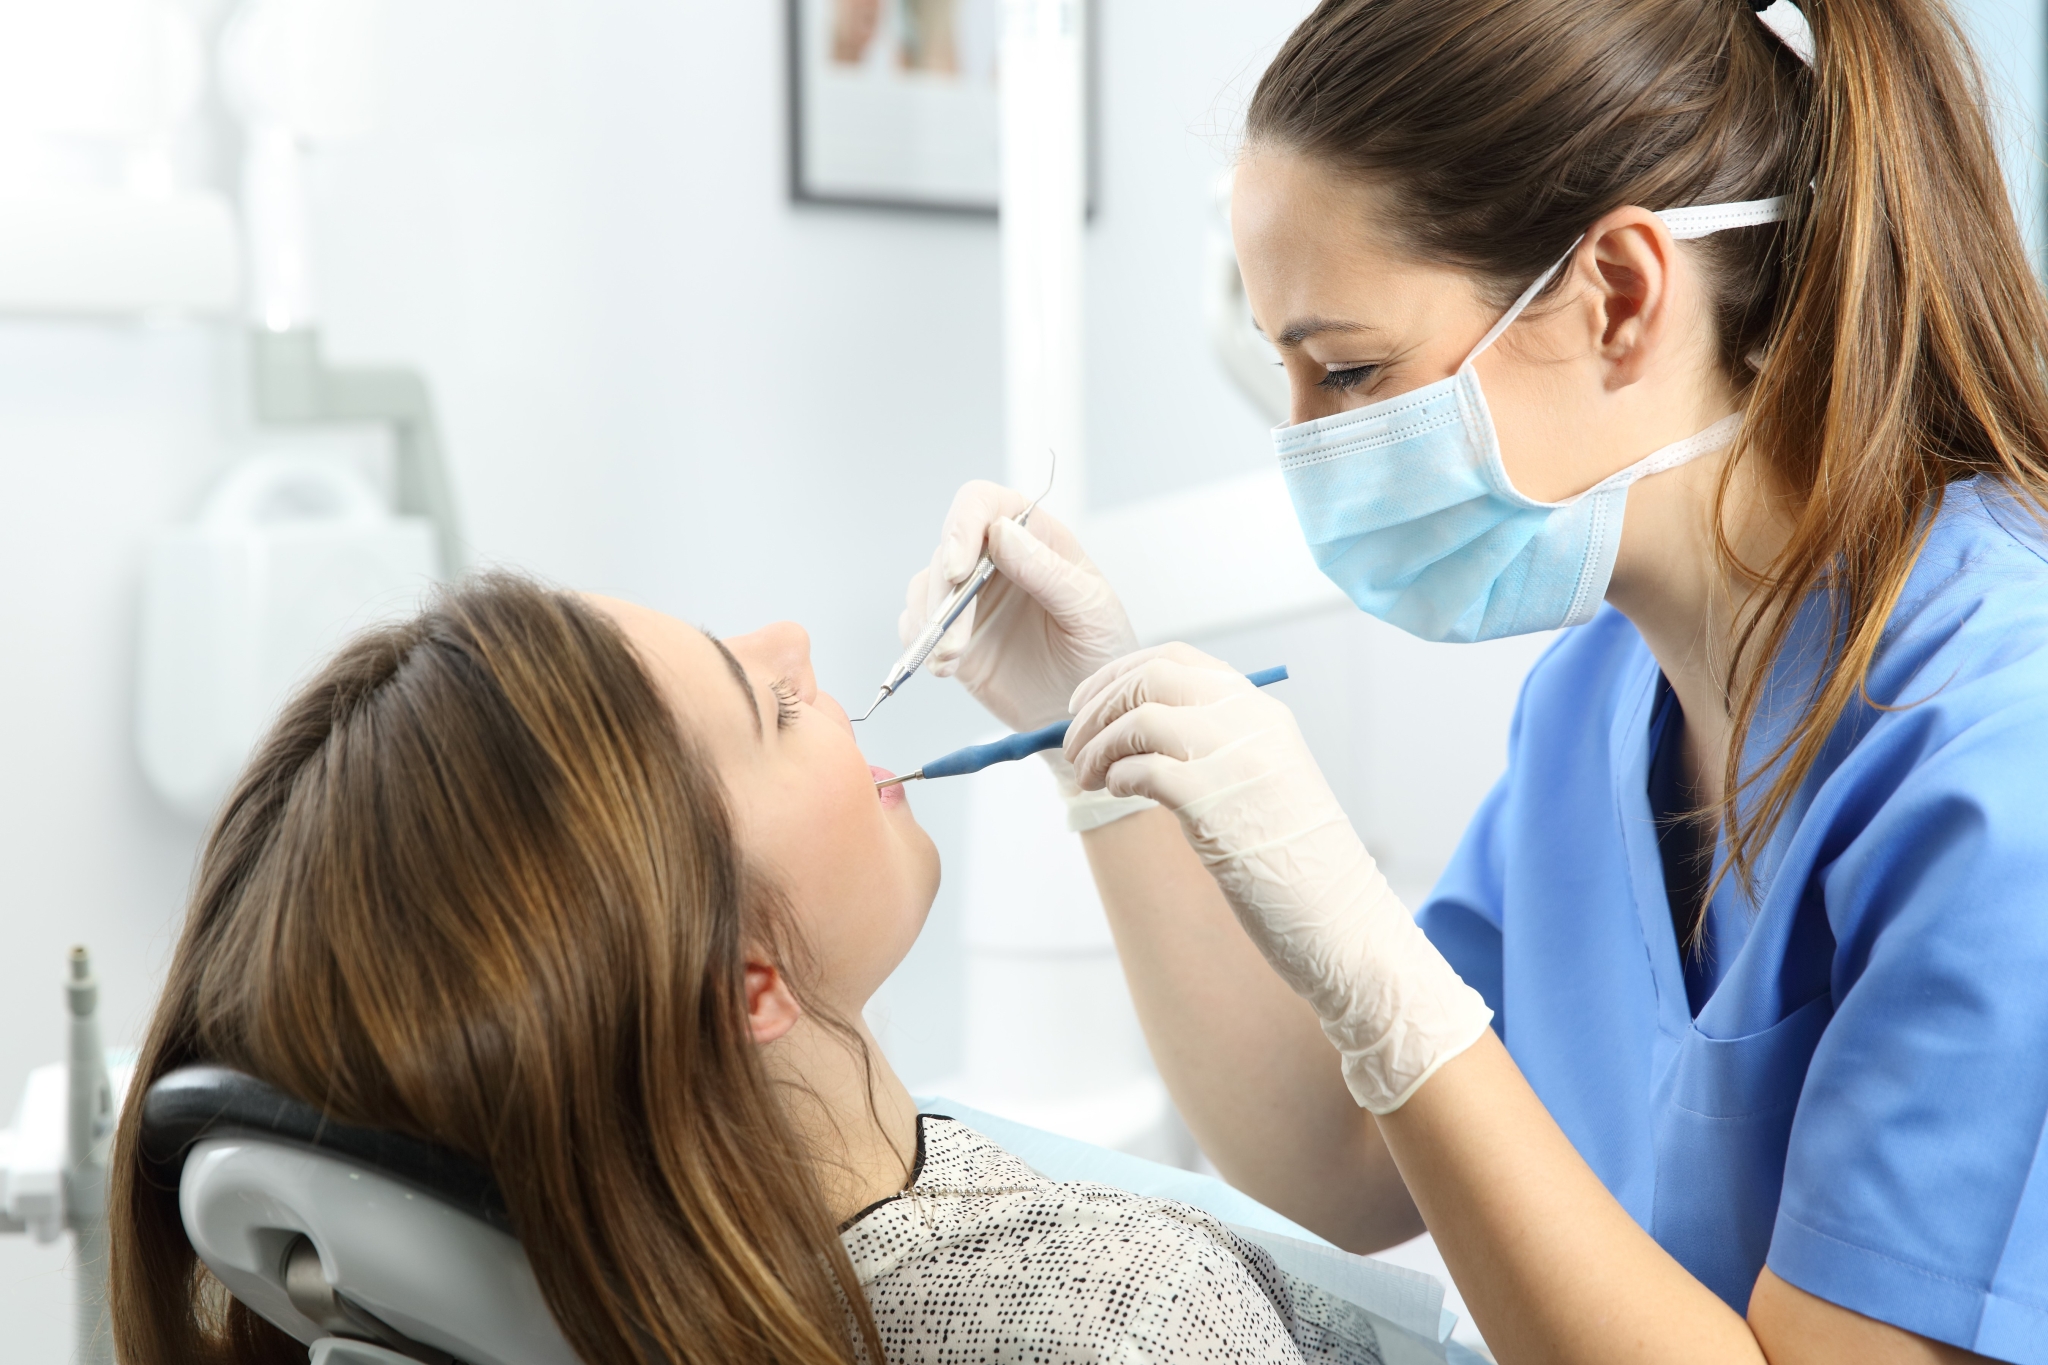 Dental professional examining a woman's mouth